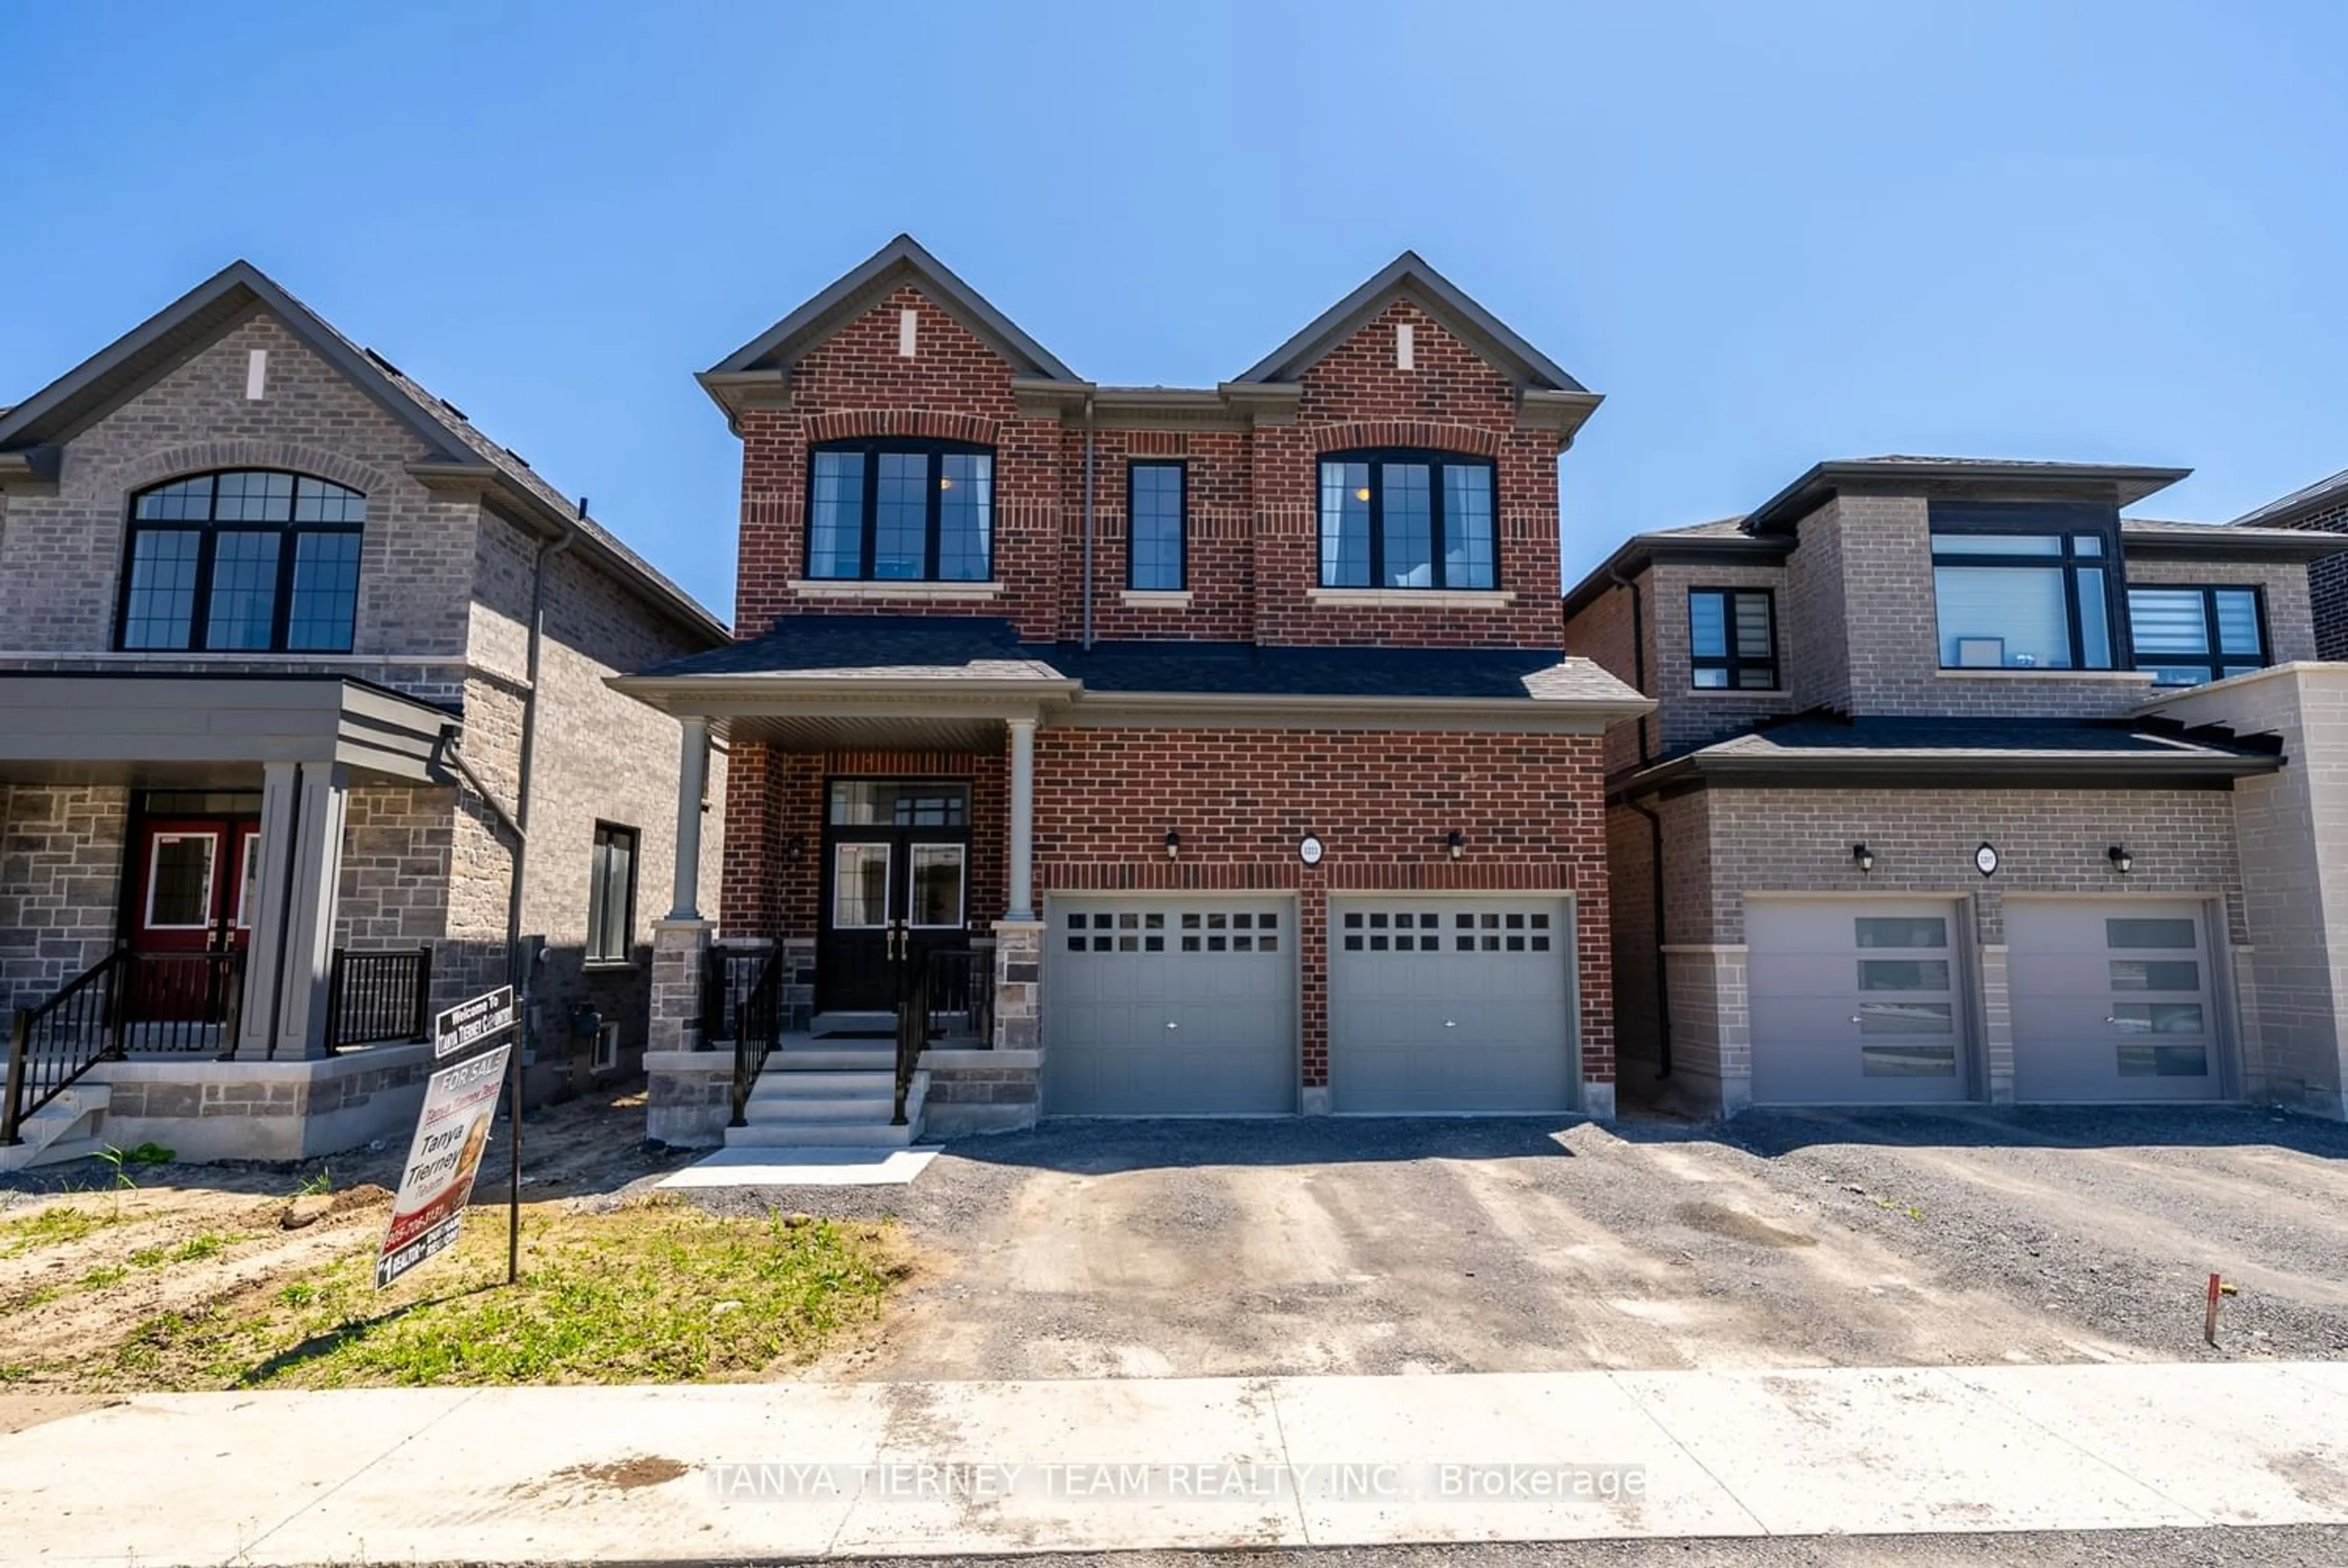 Home with brick exterior material for 1211 Plymouth Dr, Oshawa Ontario L1H 8L7